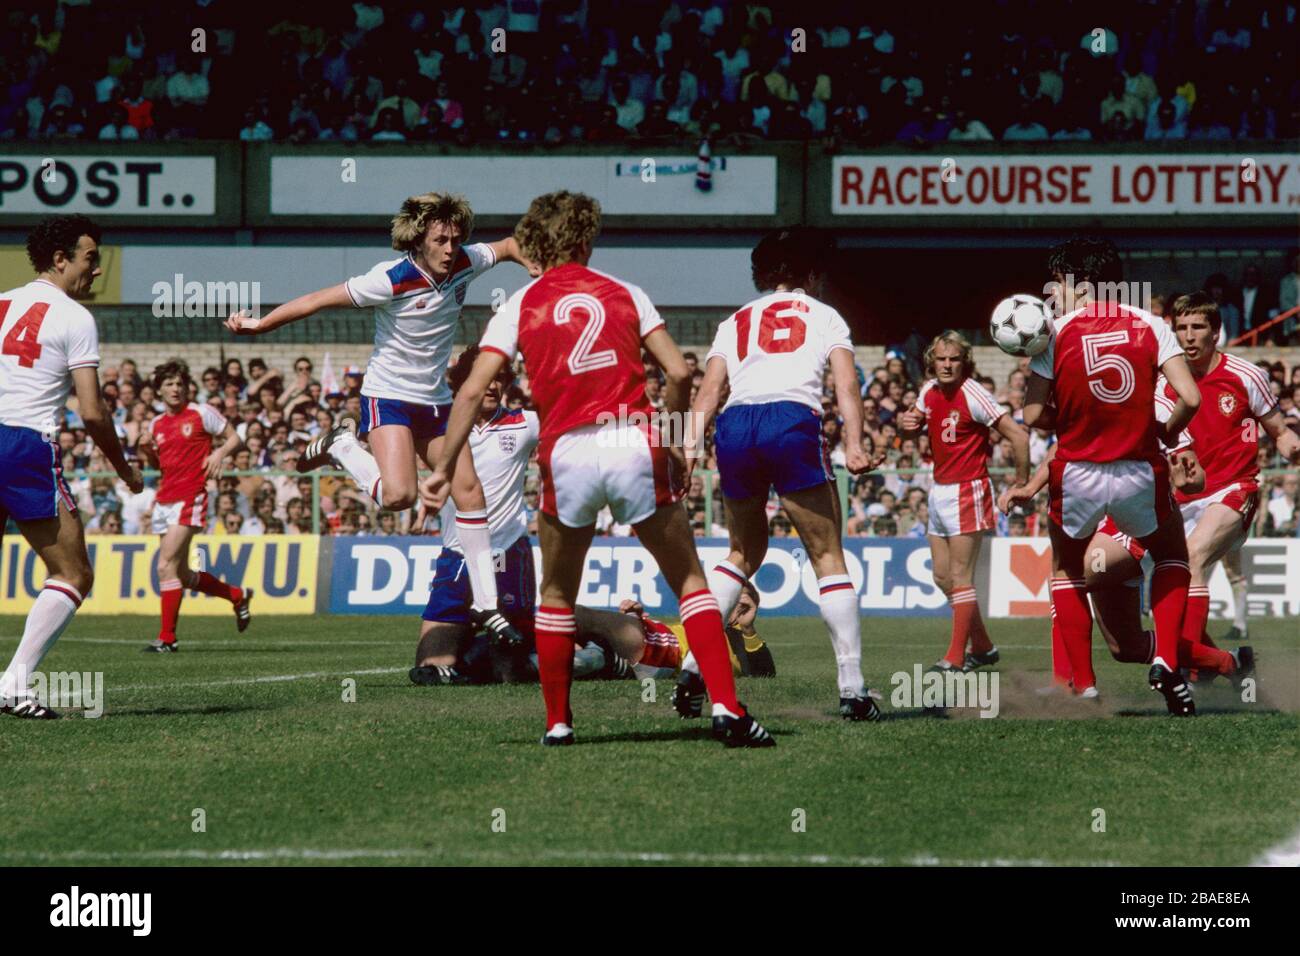 England's Paul Mariner (fourth r) deflects a shot from teammate Peter Barnes (second l) into the Wales net, via the shoulder of Wales's David Jones (second r), for England's only goal of the game, watched by teammates Ray Kennedy (l) and Larry Lloyd (third l) and Wales's Joey Jones (r), Terry Yorath (third r), Paul Price (fourth l) and Dai Davies (on floor) Stock Photo